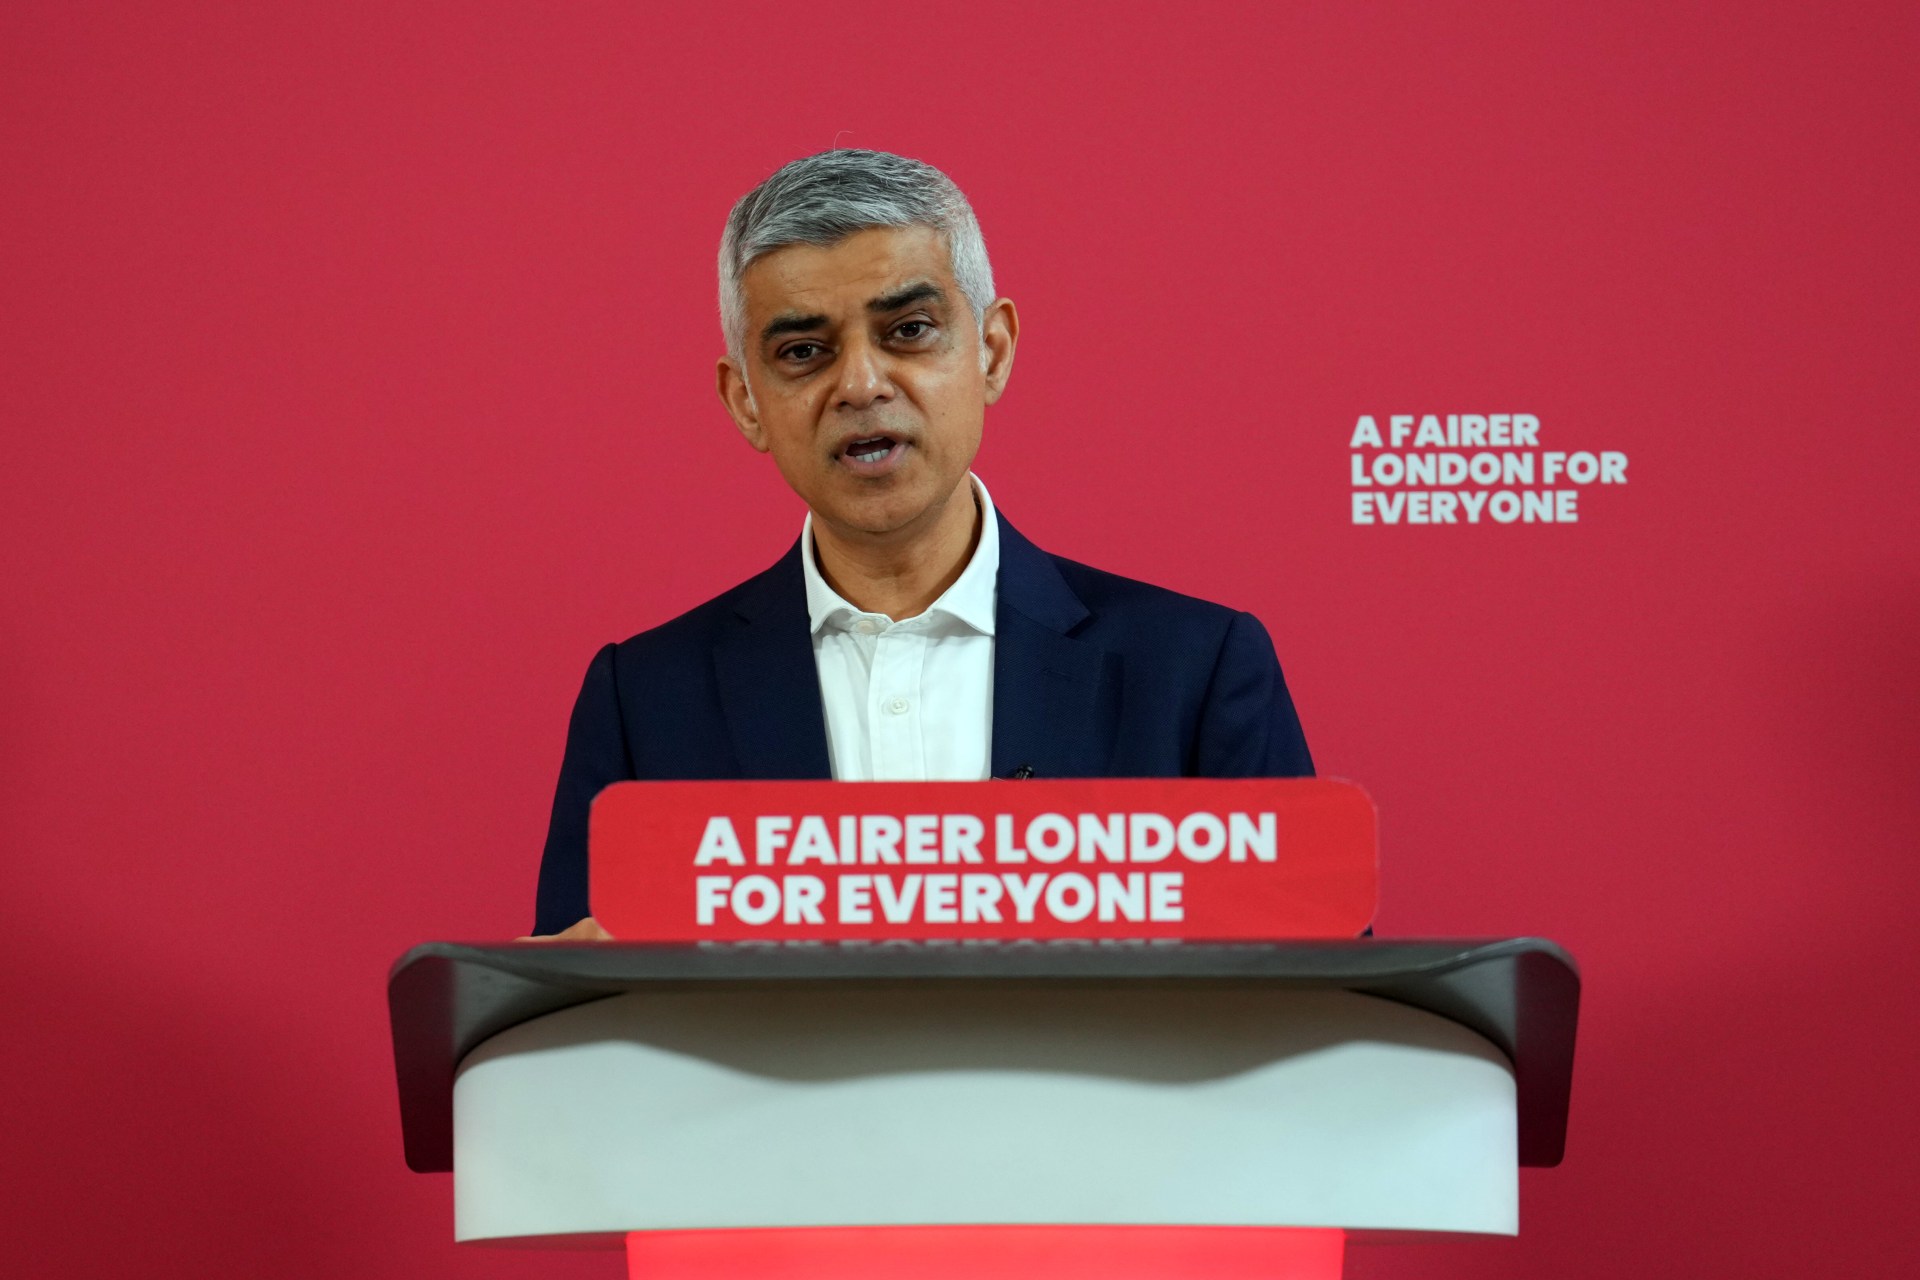 what are sadiq khan’s policies if he’s re-elected as mayor of london?